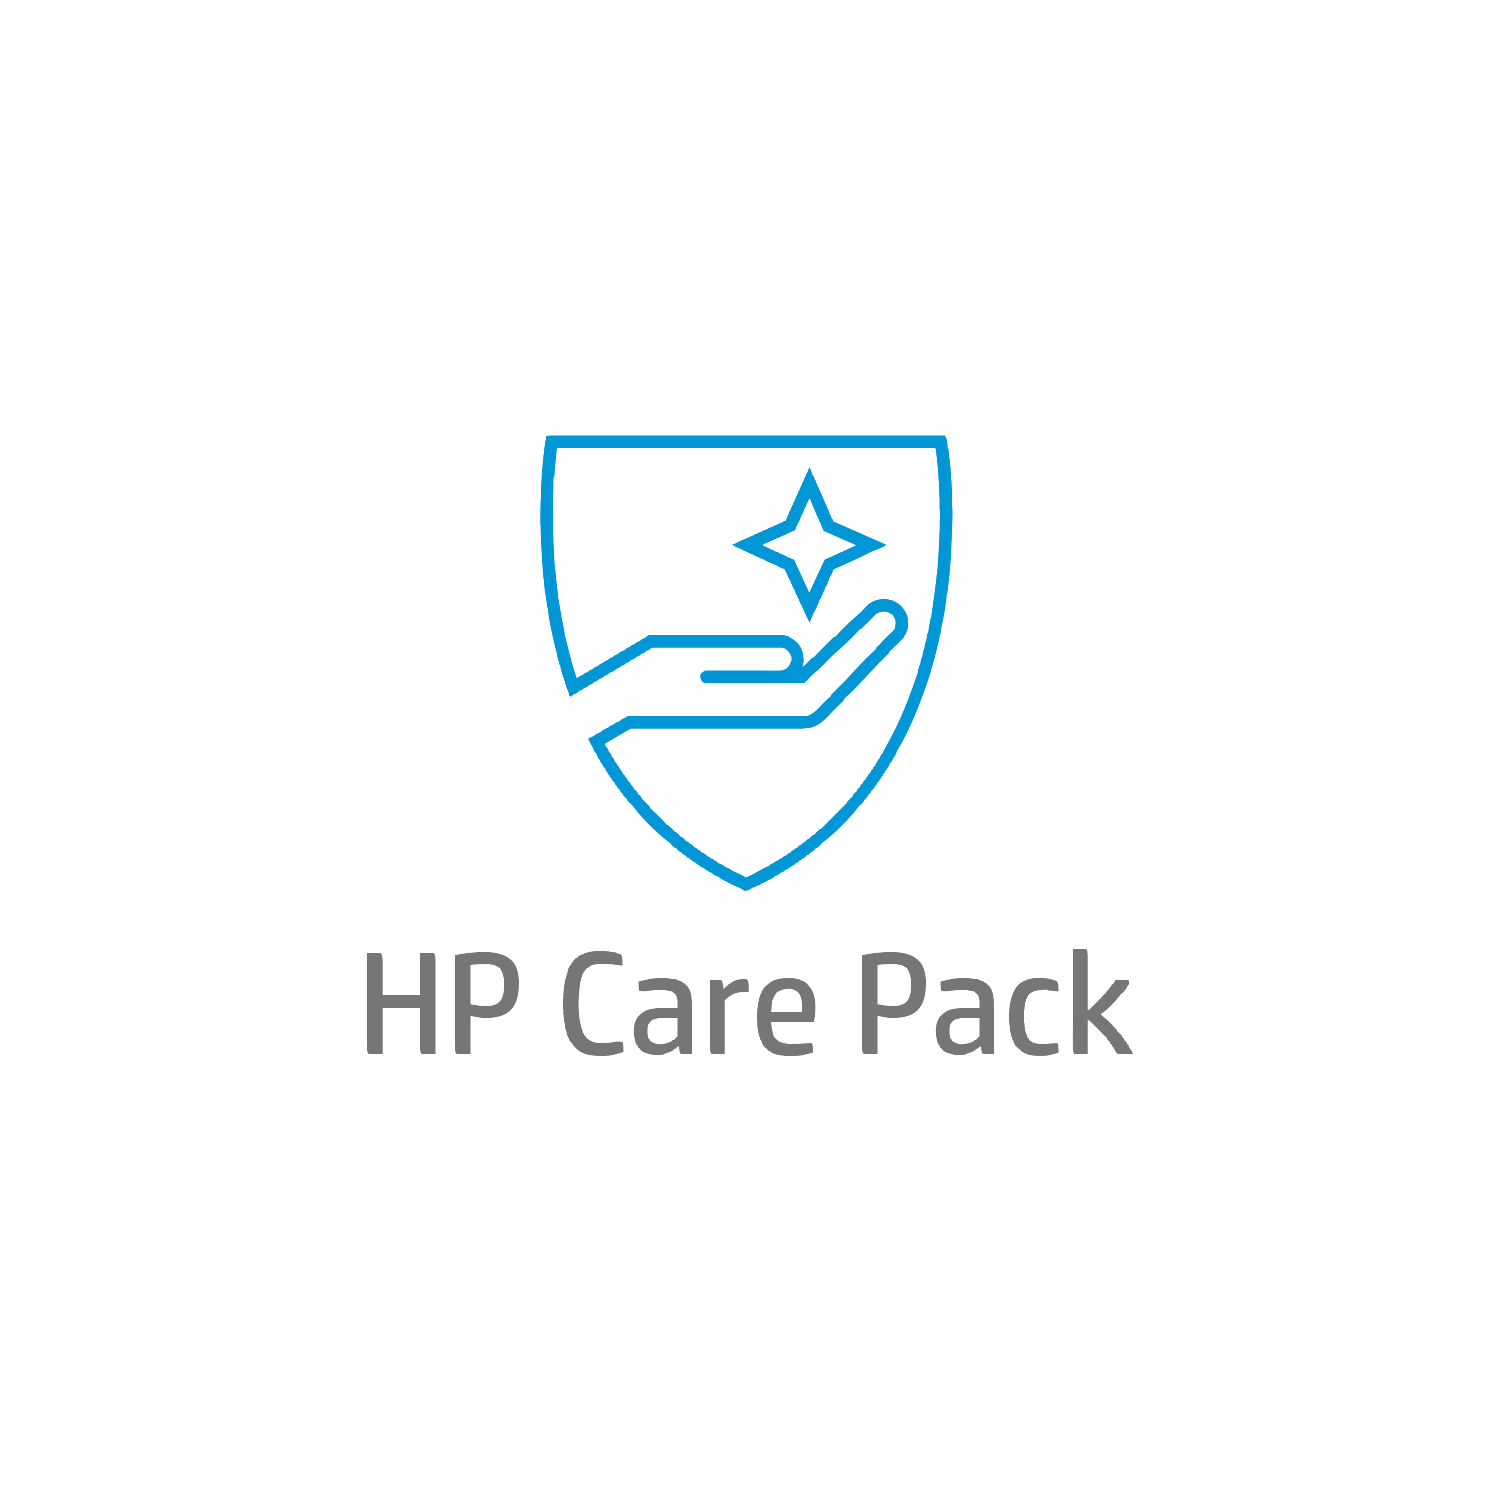 Bild von HP Electronic HP Care Pack Software Support Service